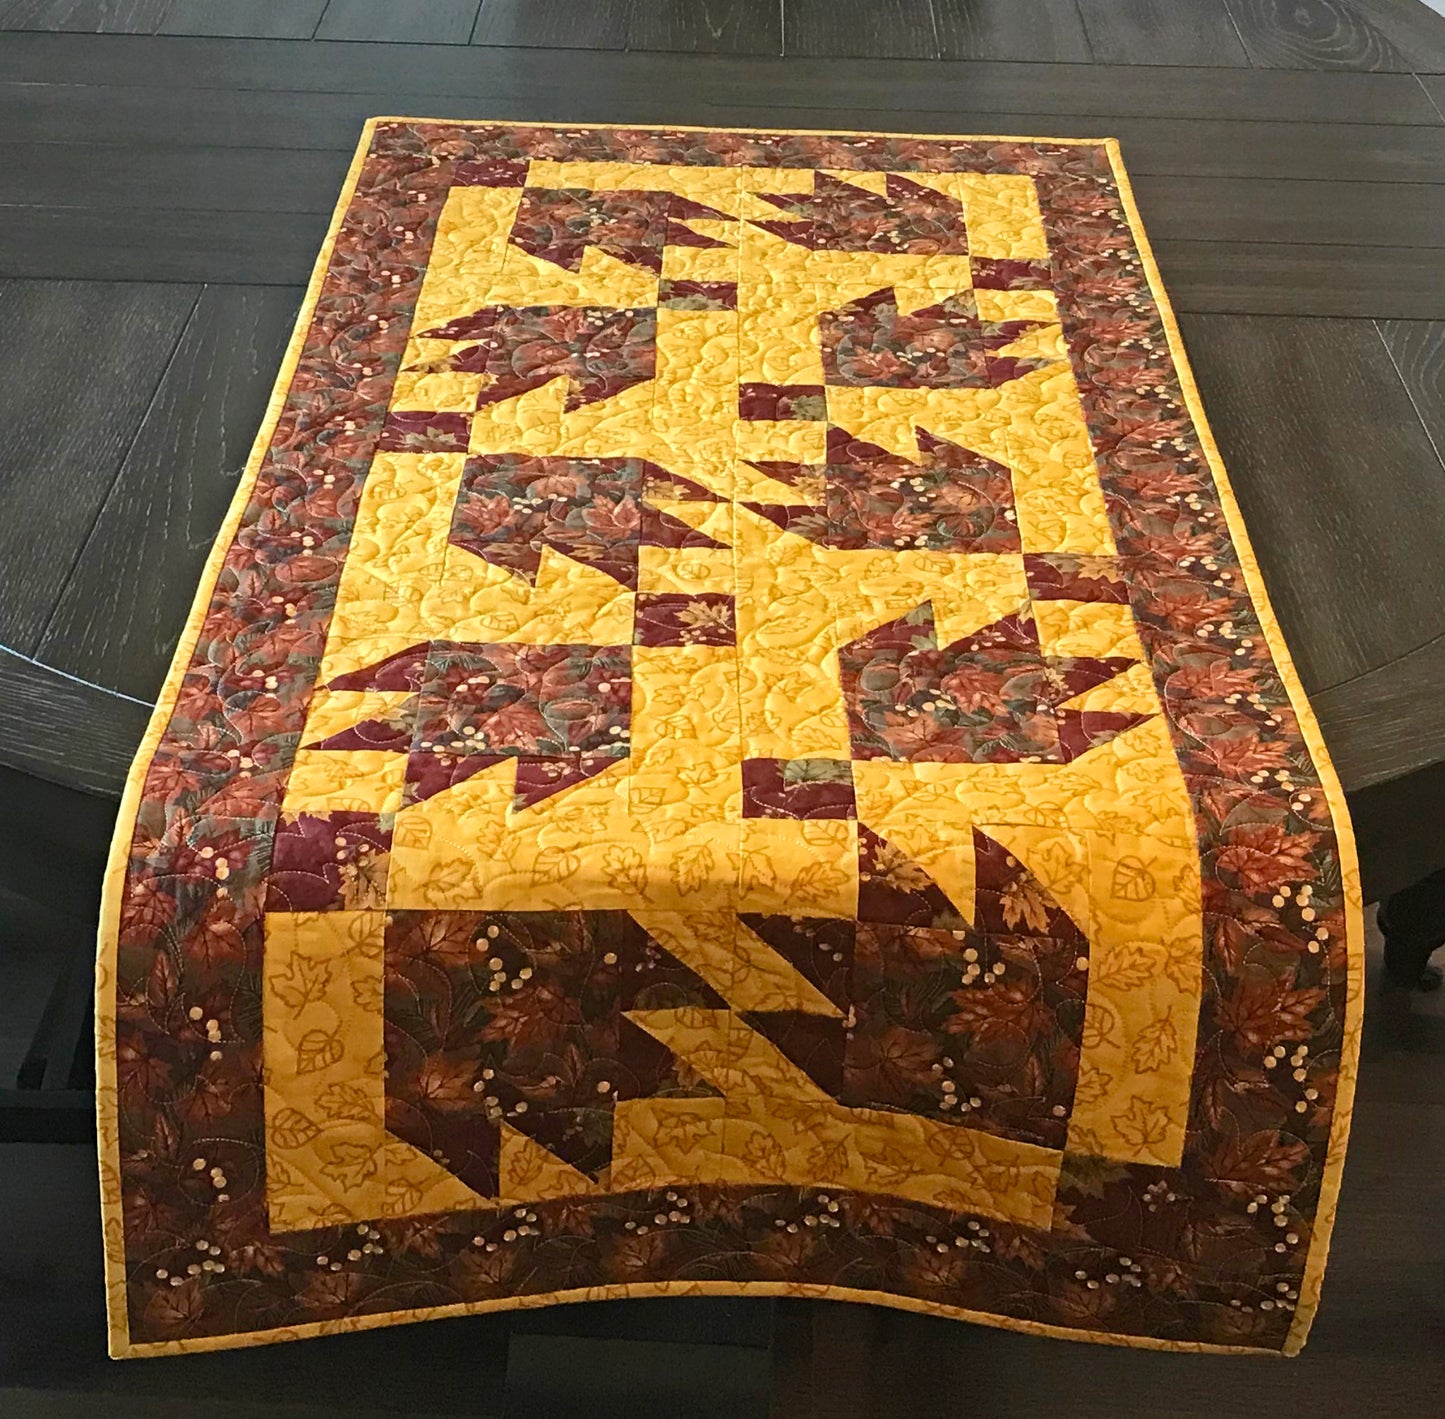 Fall Leaves Table Runner - Handmade Quilts, Digital Patterns, and Home Décor items online - Cuddle Cat Quiltworks